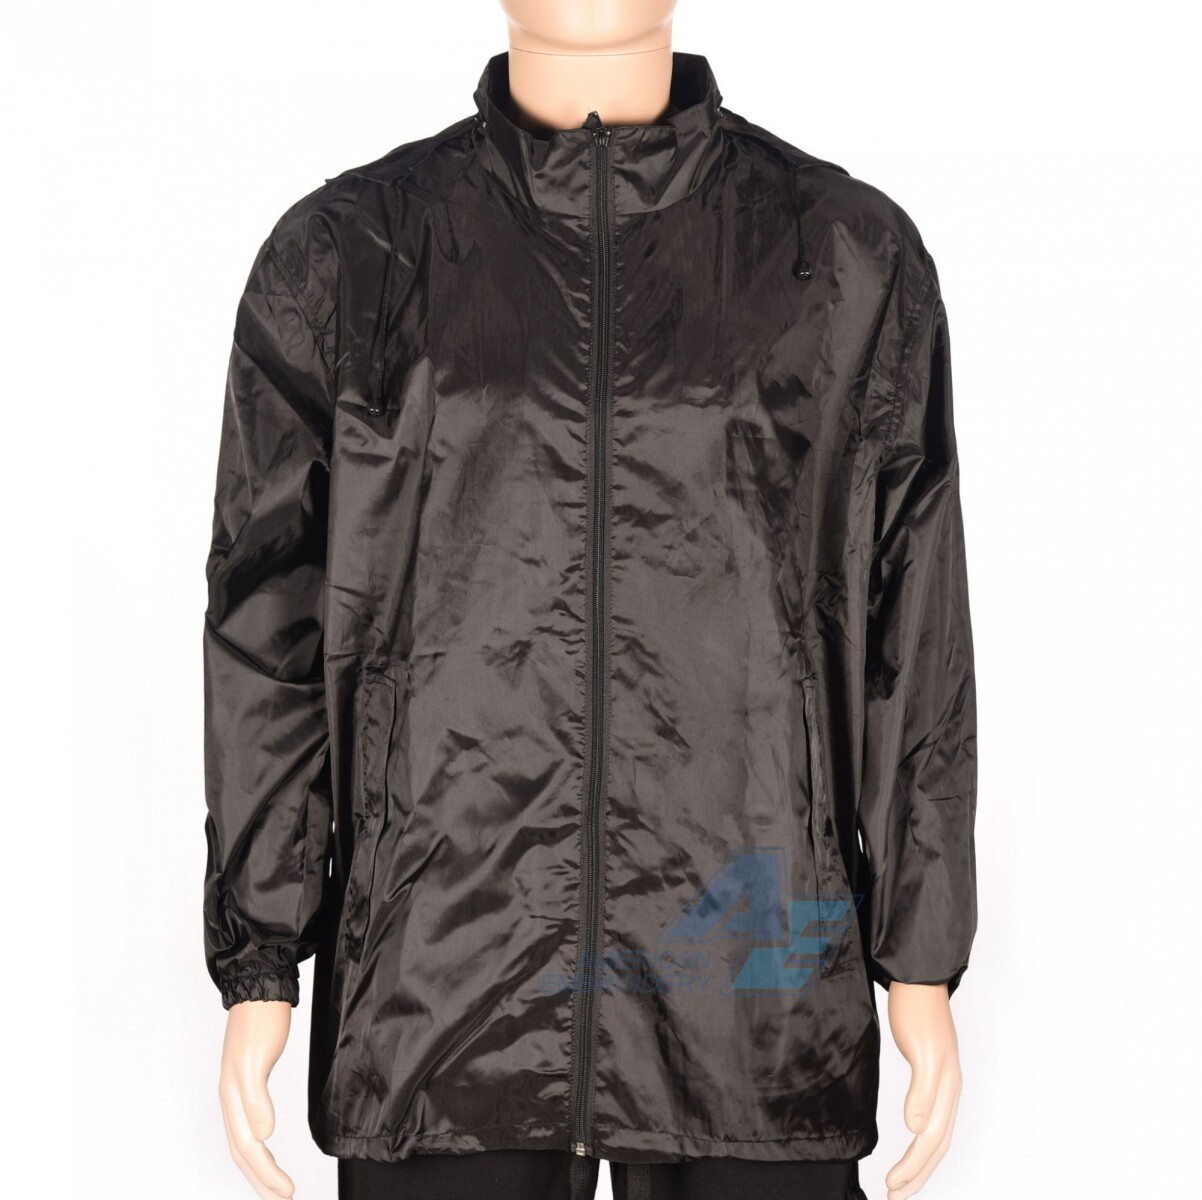 Campera impermeable - Negro 